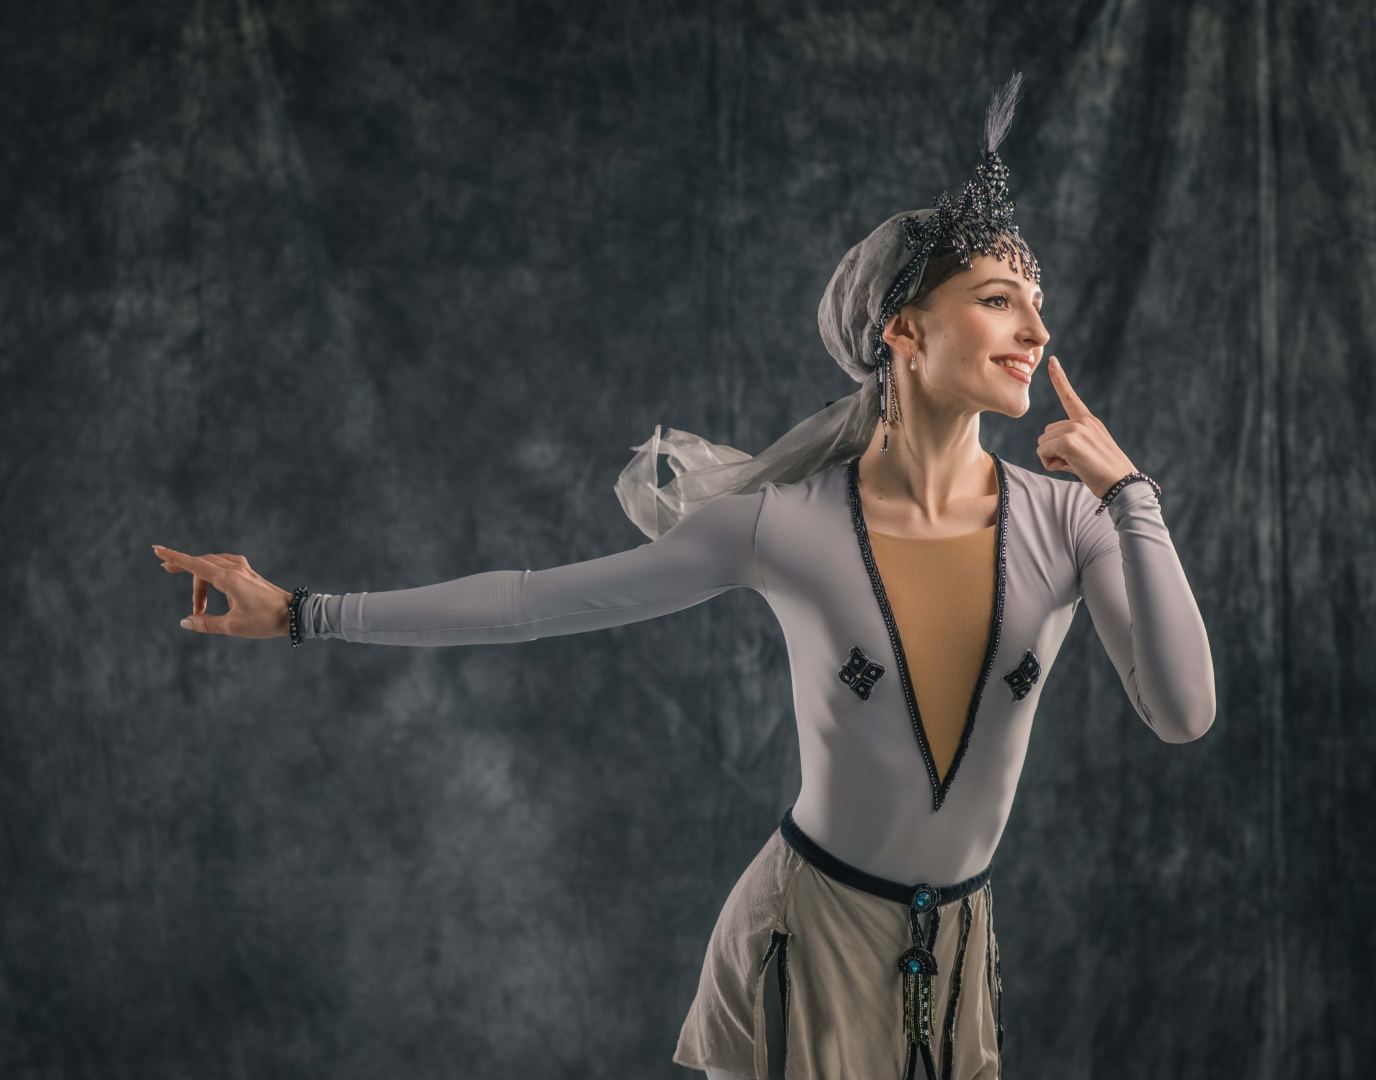 Over 200 costumes created for "The Legend of Love" ballet [PHOTOS/VIDEO]